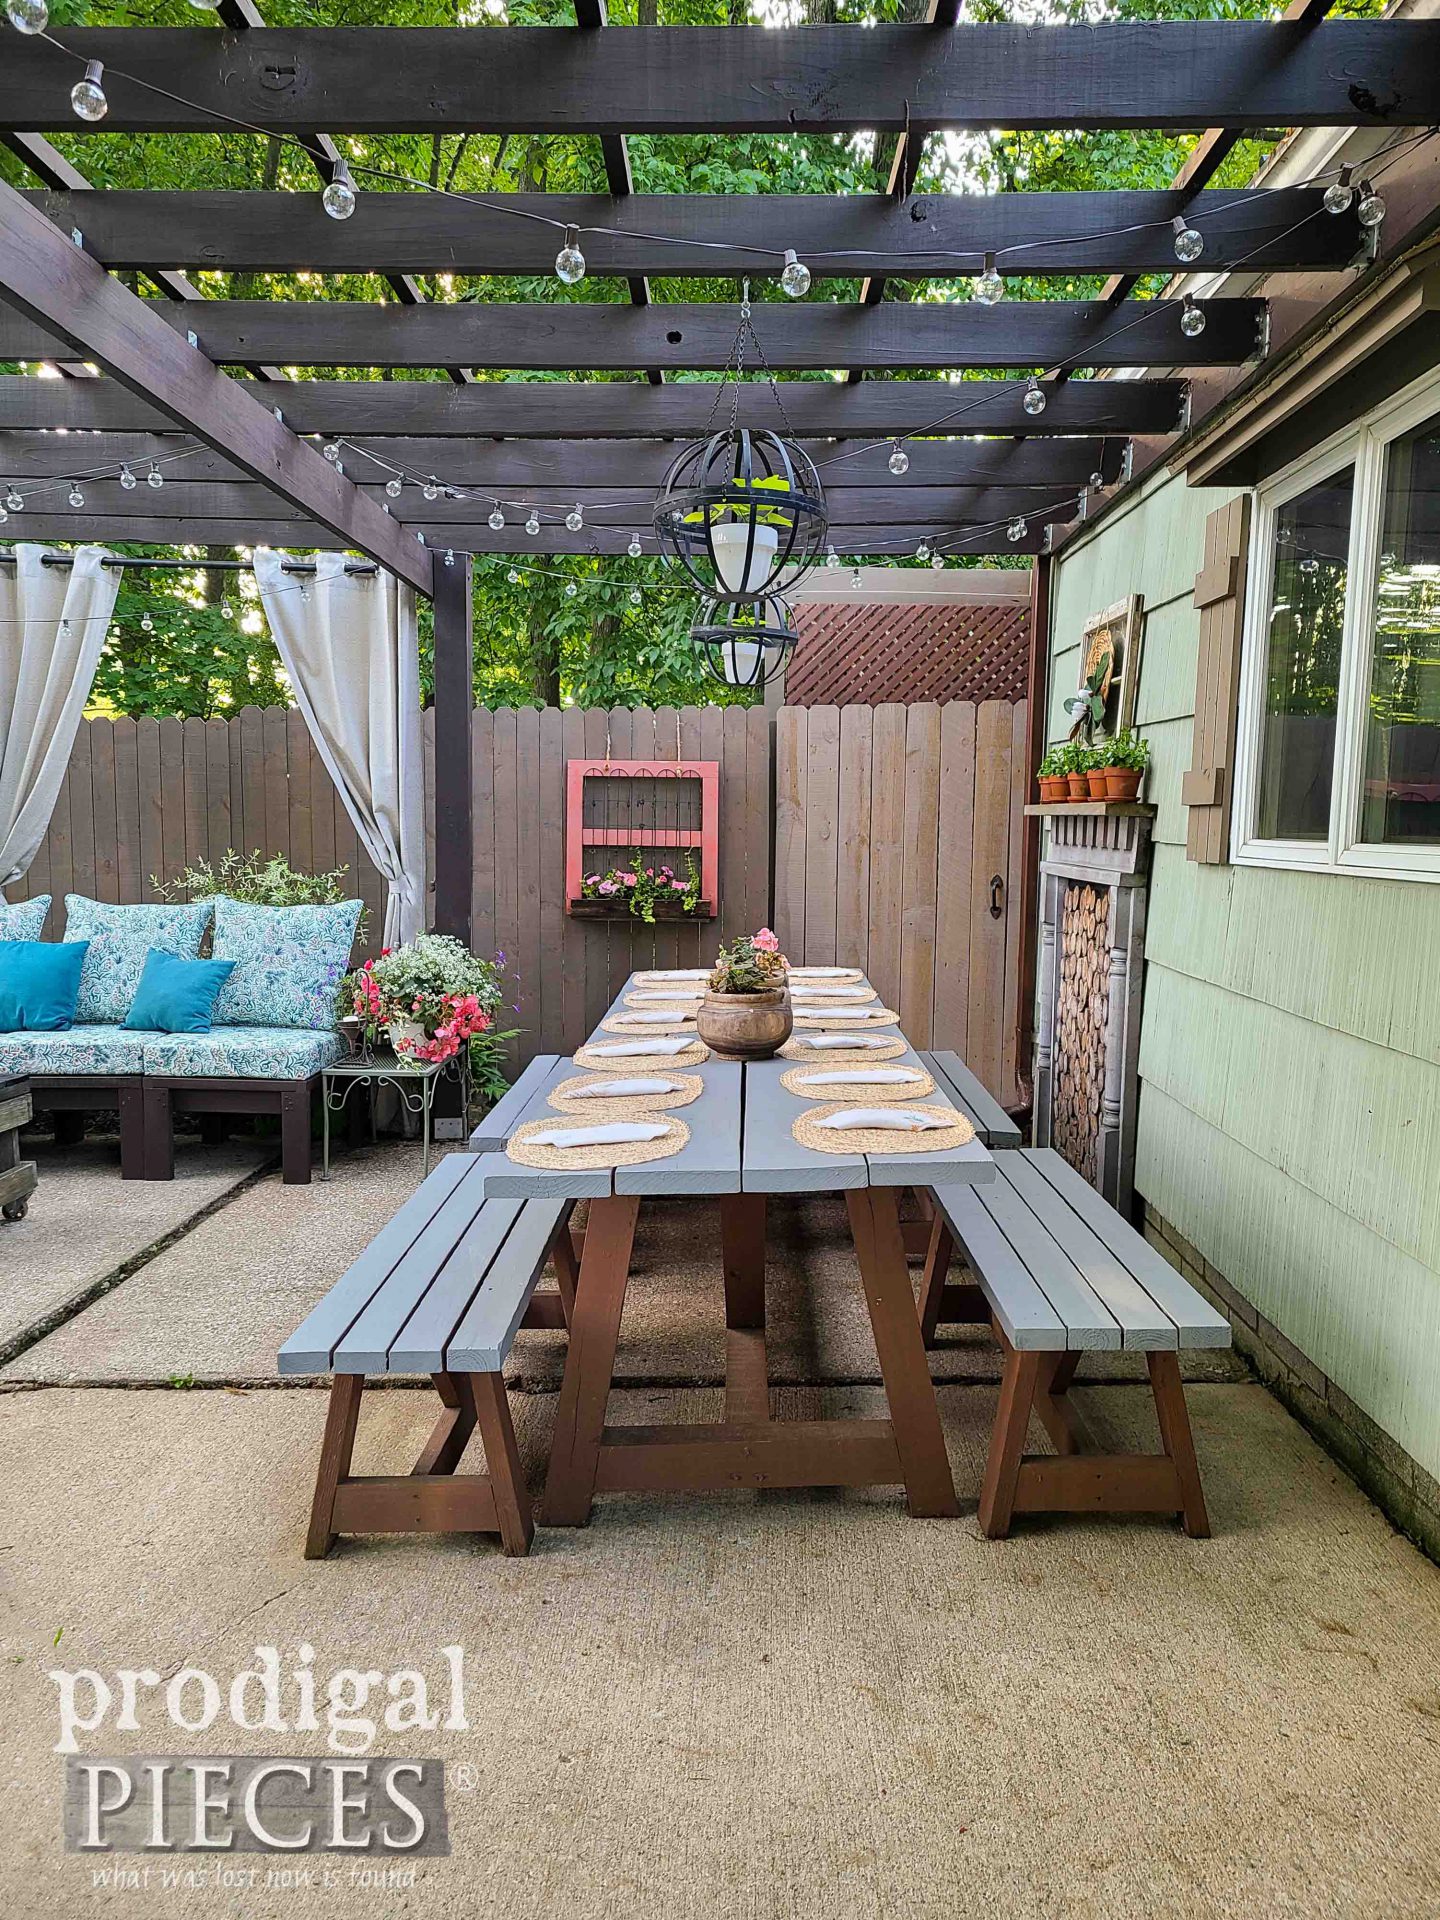 Outdoor Dining Table with DIY Patio Sectional by Larissa of Prodigal Pieces | prodigalpieces.com #prodigalpieces #outdoor #patio #diy #summer